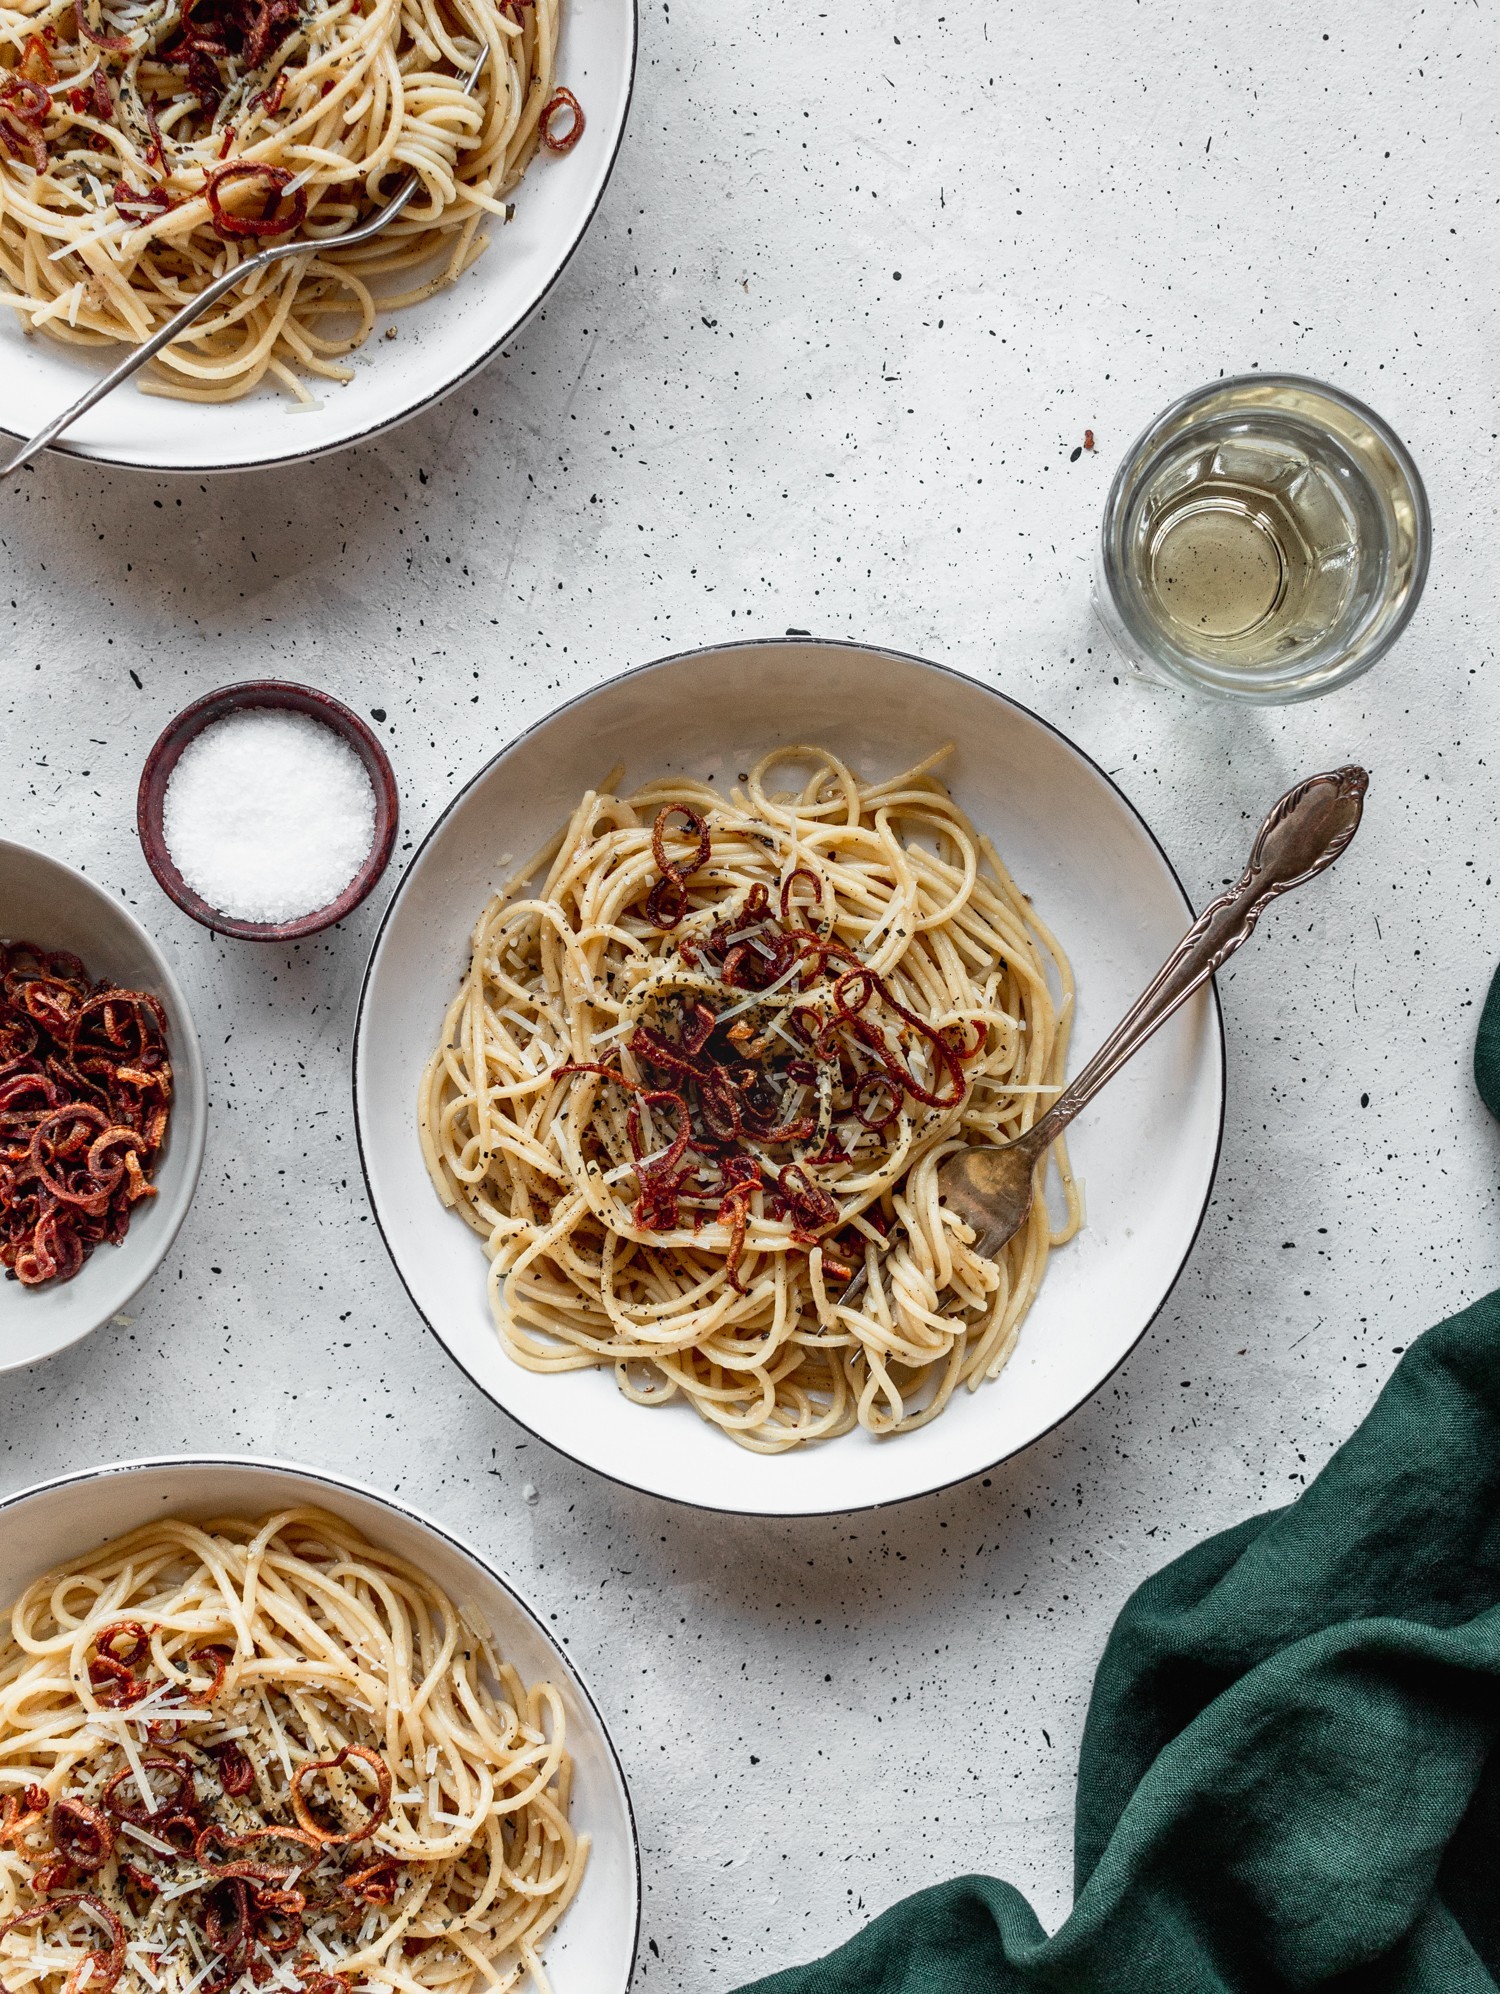 An overhead view of three bowls of pasta on a grey table surrounded by a dark green linen, a glass of white wine, and a bowl of fried shallots.